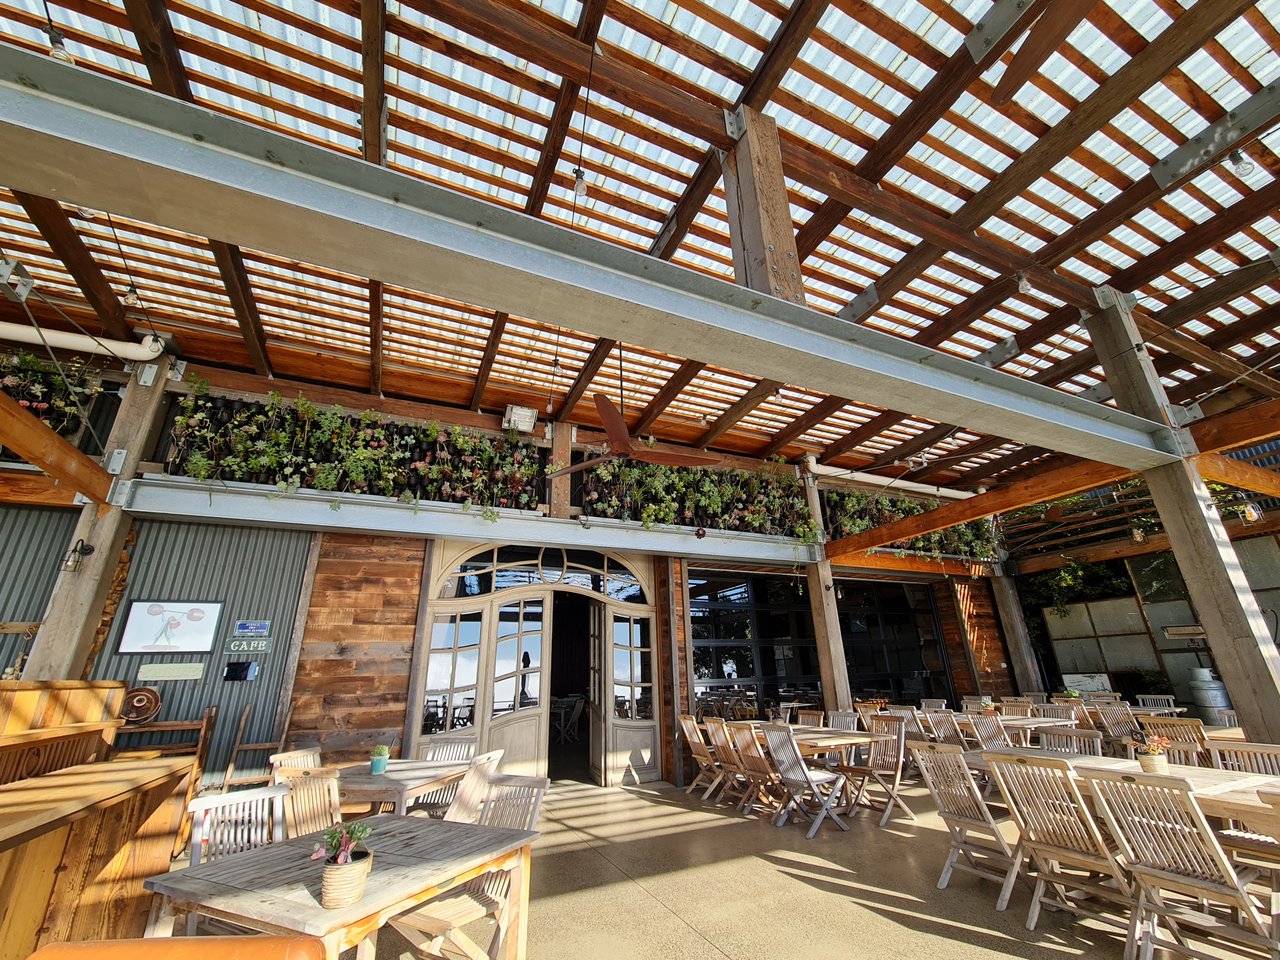 The al fresco terrace at Clyde Park Vineyard, with rooftop overhead.